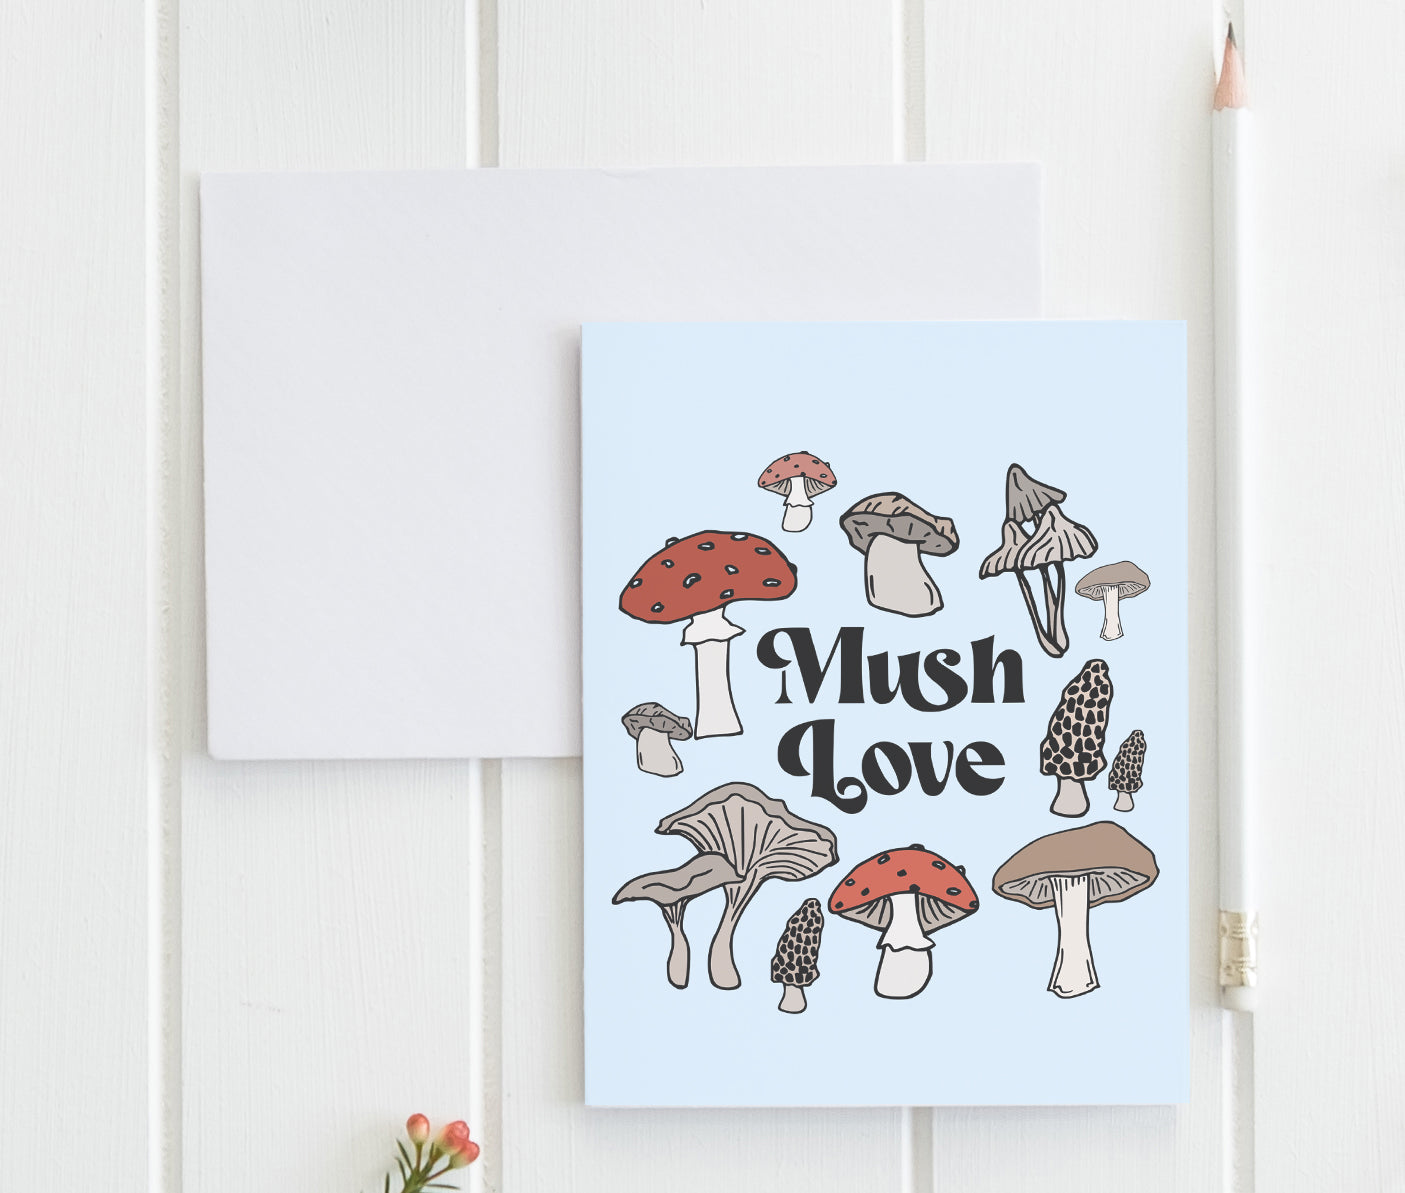 a greeting card with mushrooms on it